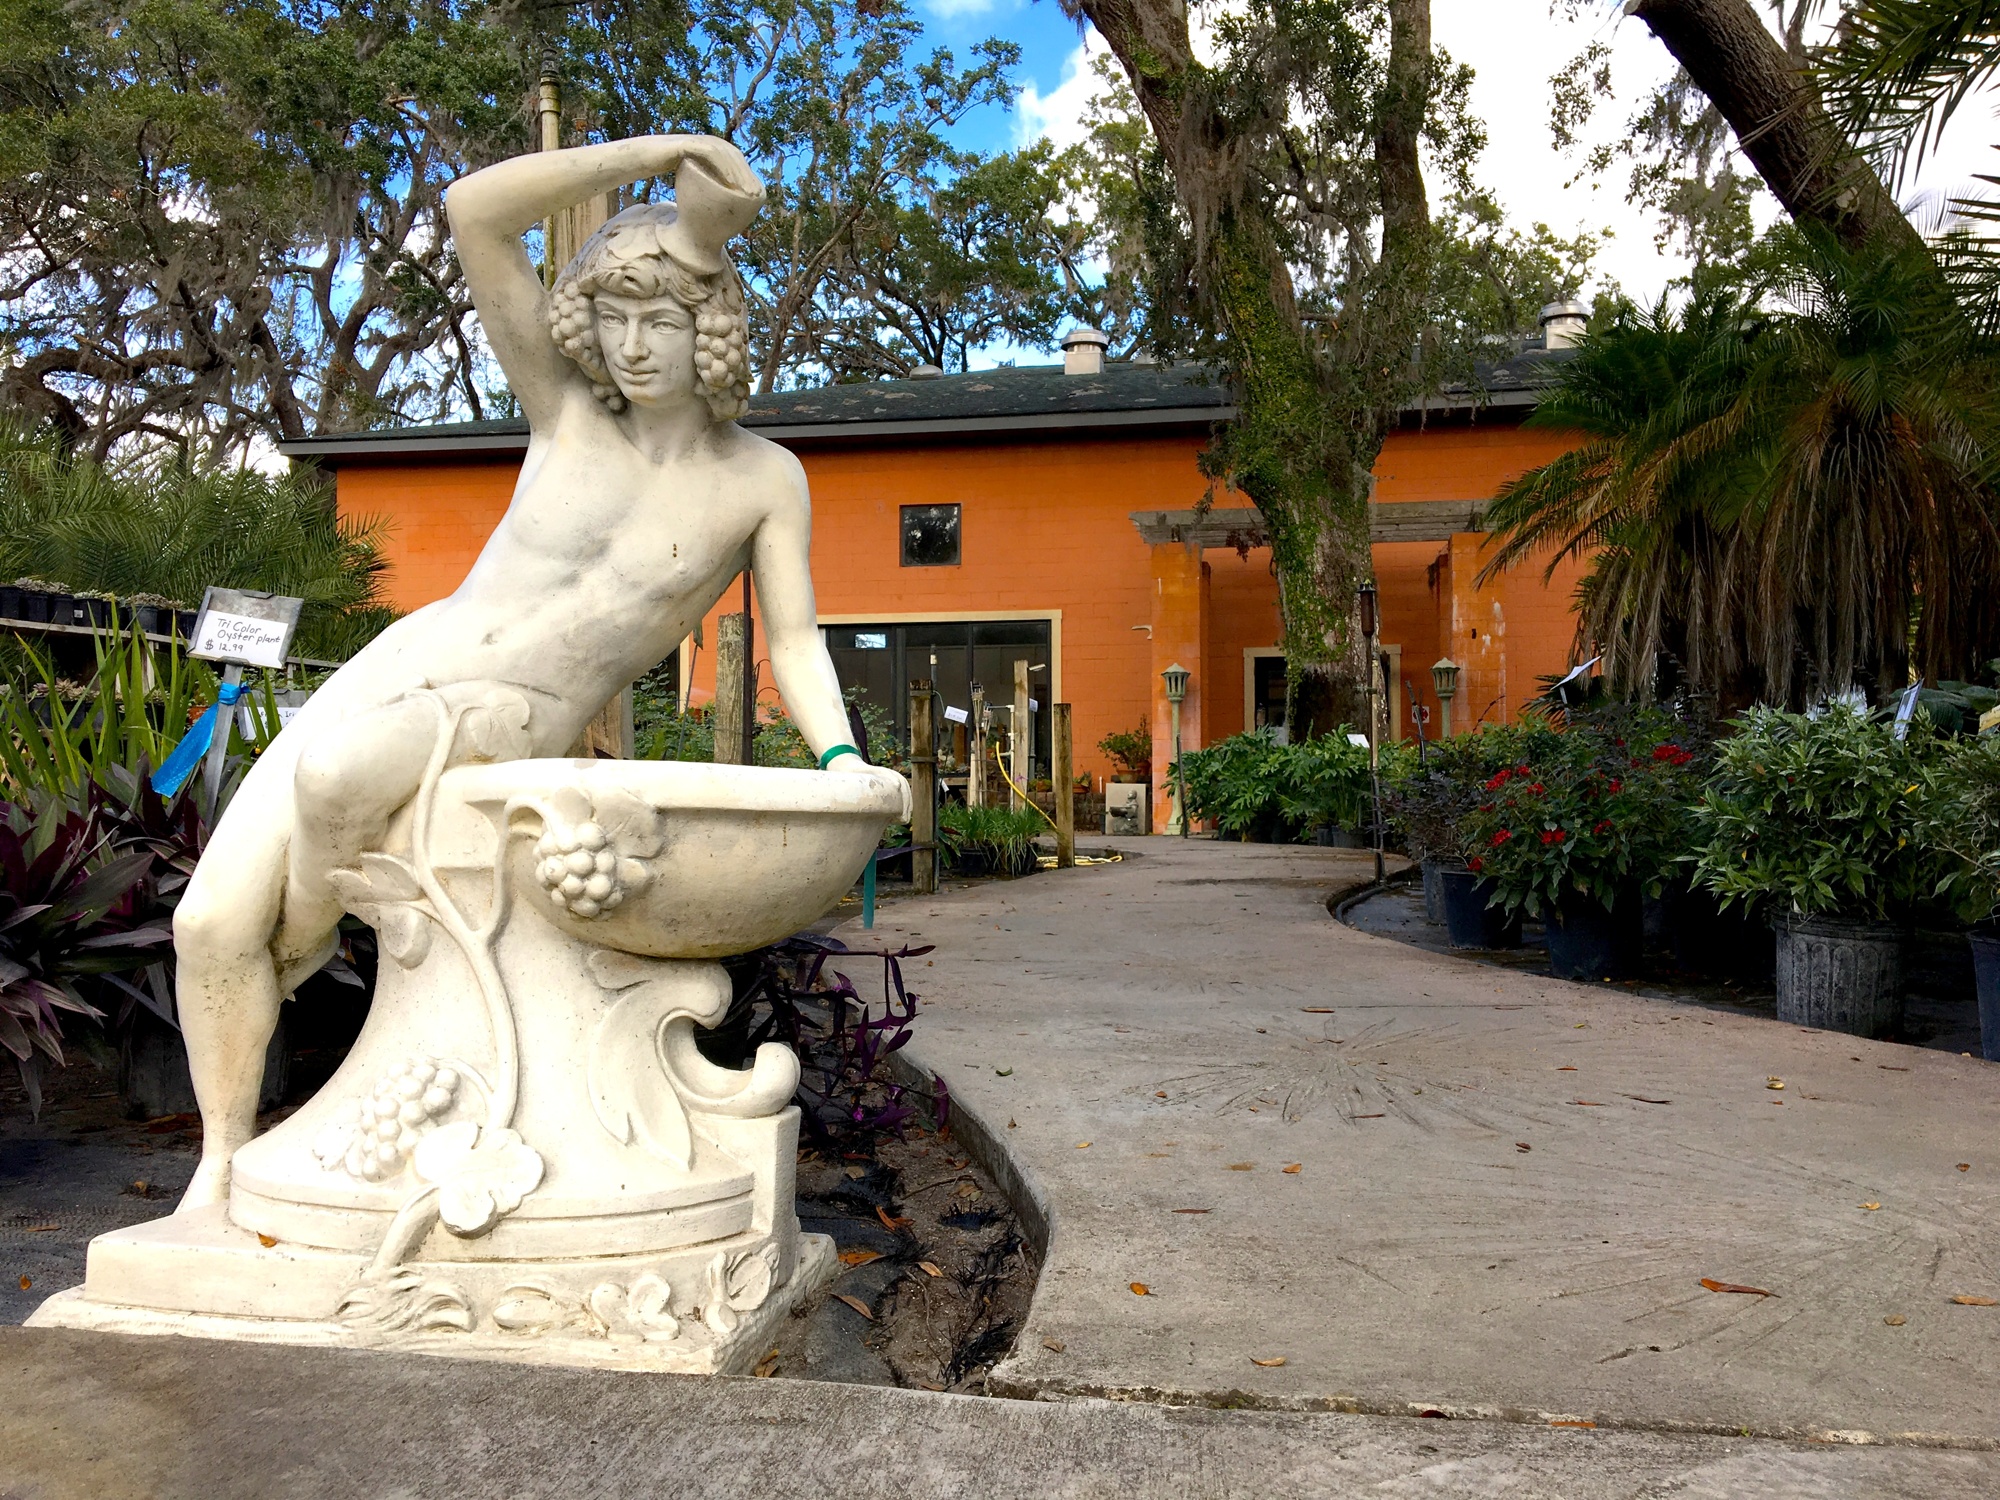 Statues at Nature Scapes welcome visitors to Salvo Art — until Jan. 7.